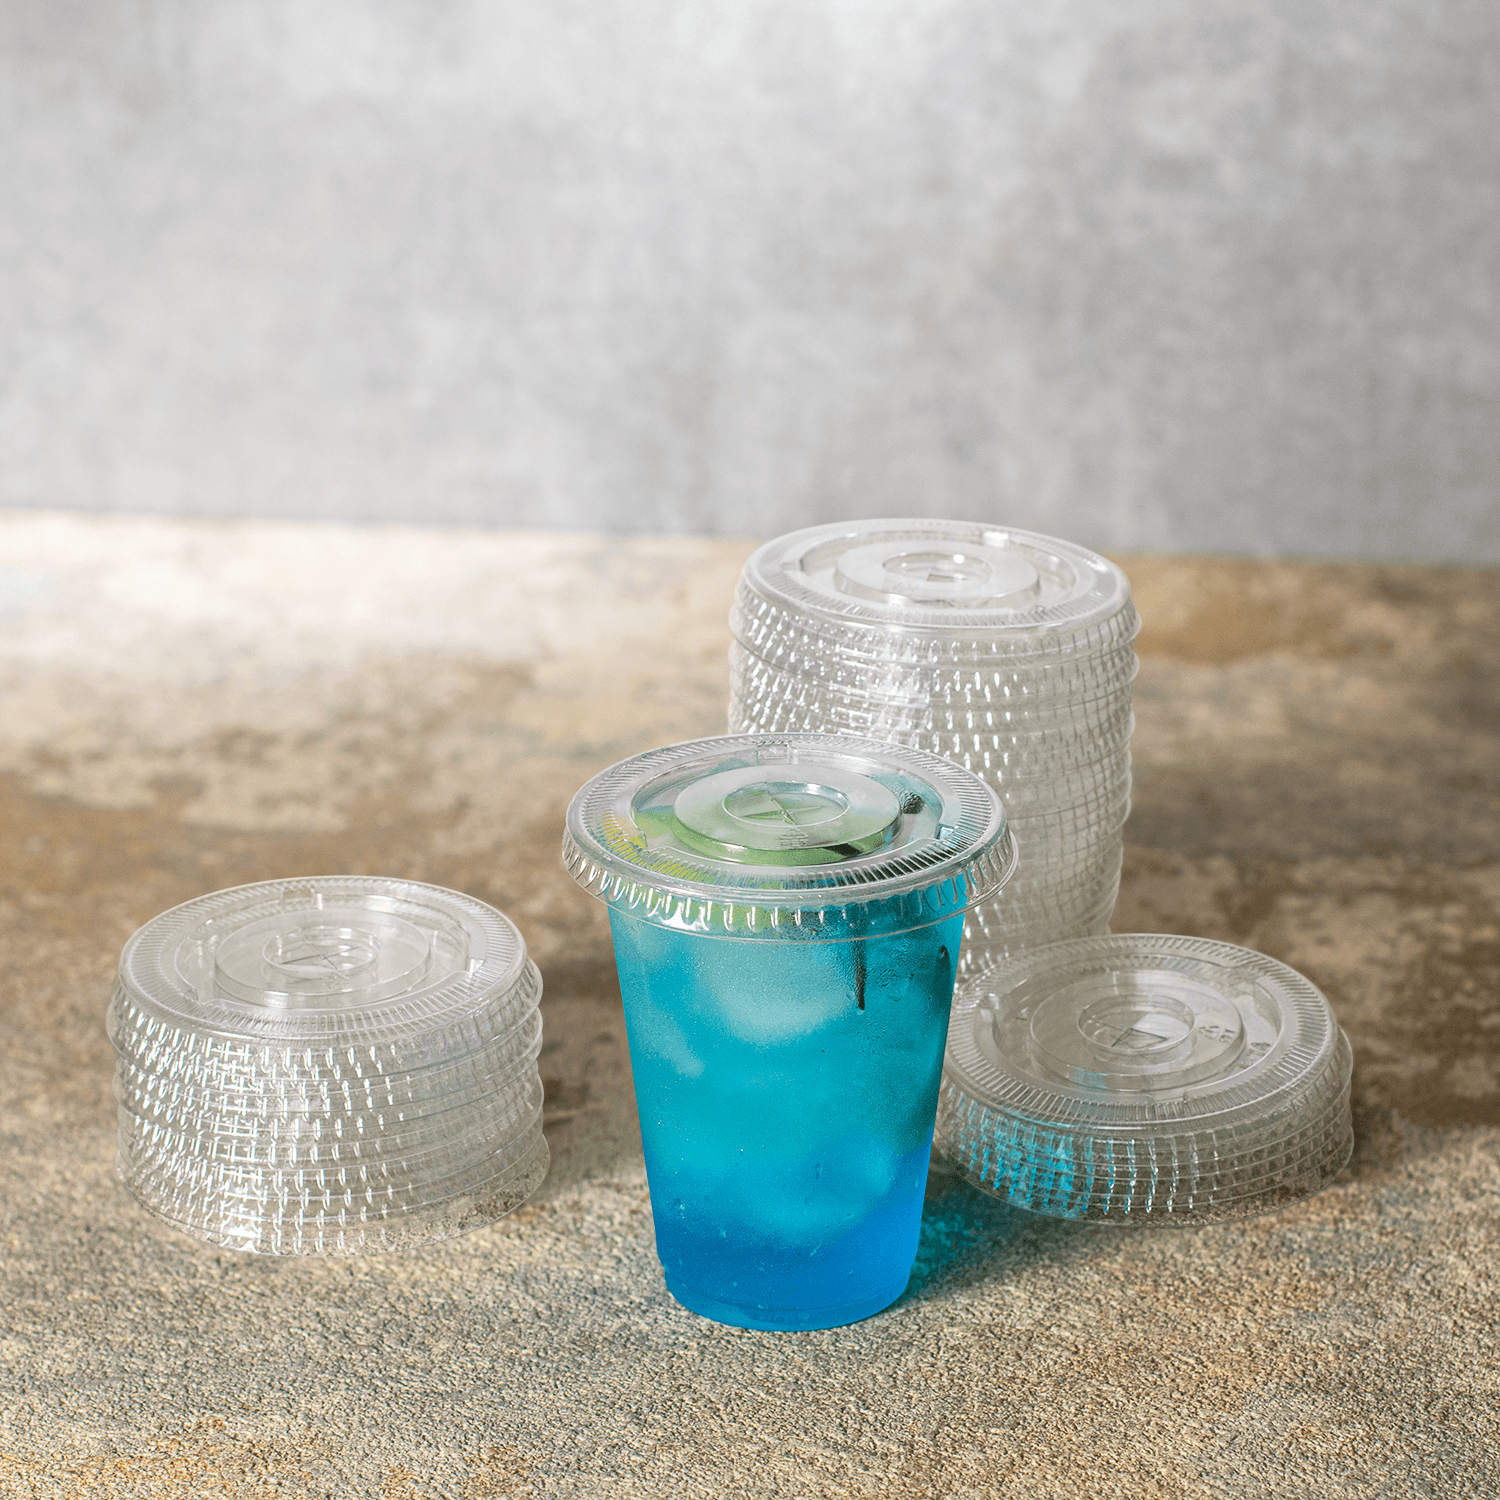 Karat PET Clear Flat Lid for 7oz PET Cup on matching cup filled with blue drink